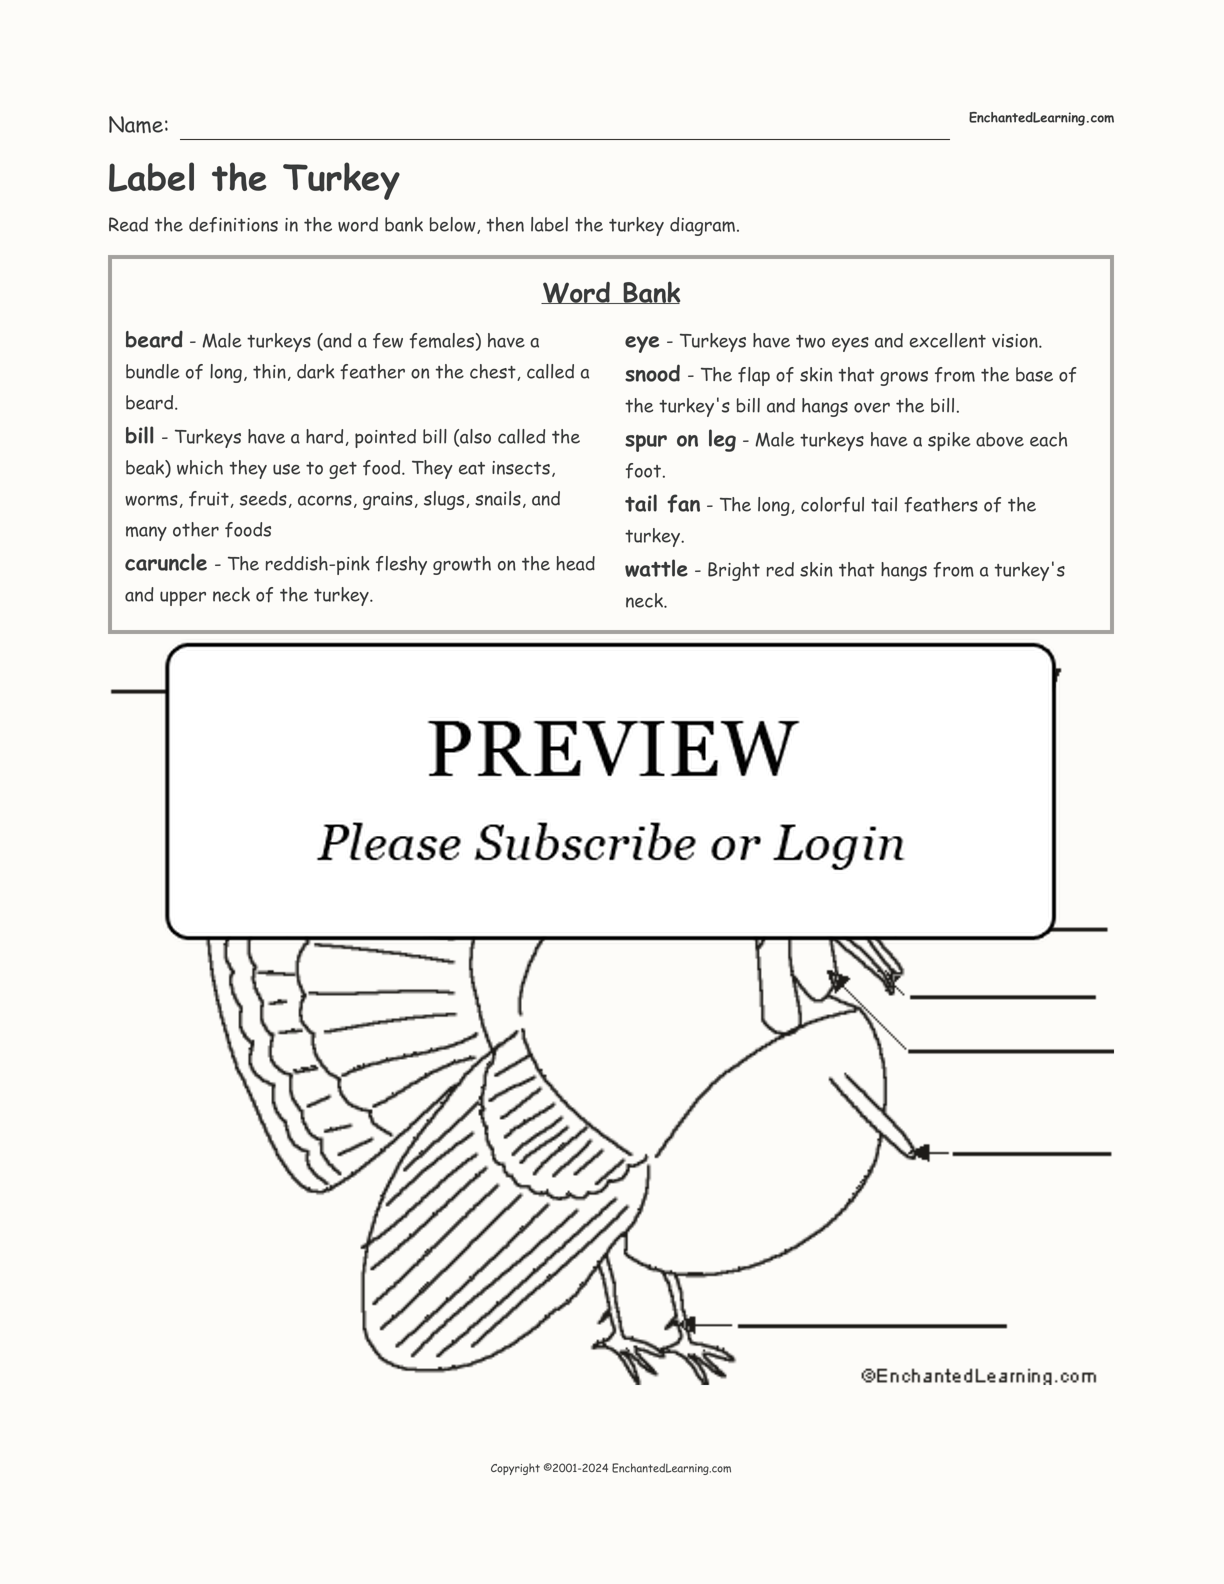 Label the Turkey interactive worksheet page 1